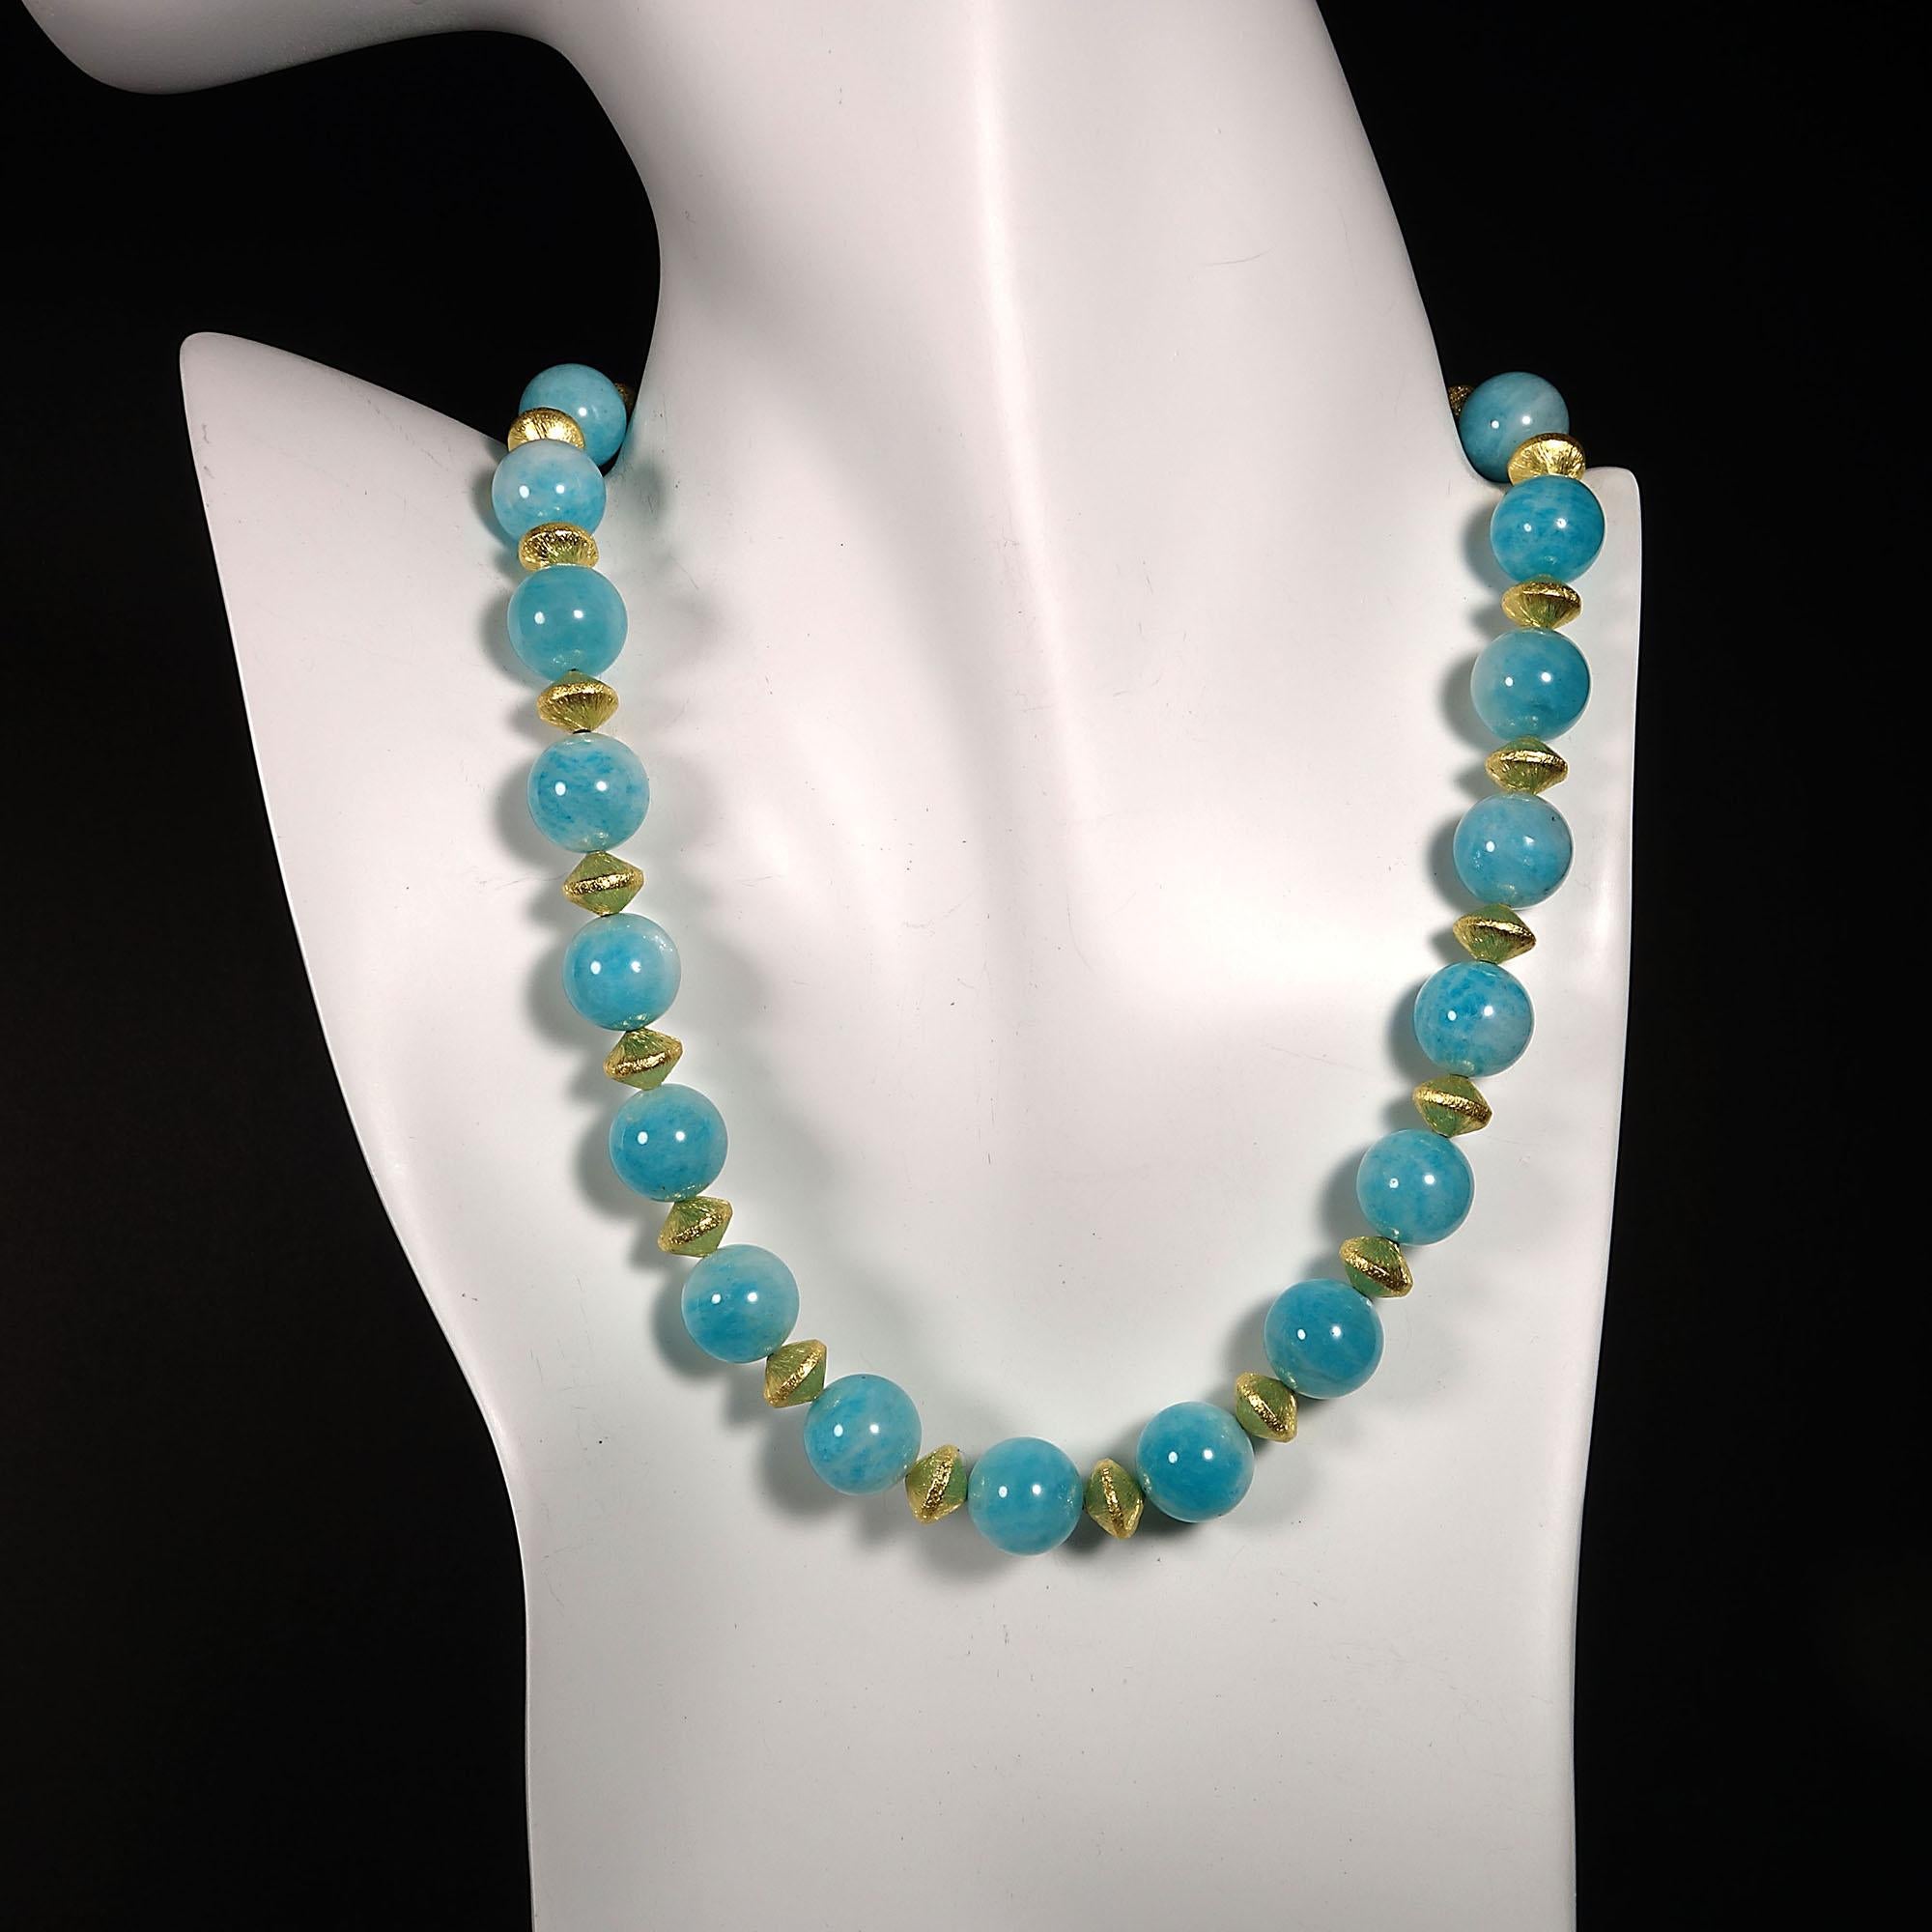 Gemjunky Choker Necklace of Glowing Amazonite with Gold Tone Accents 2